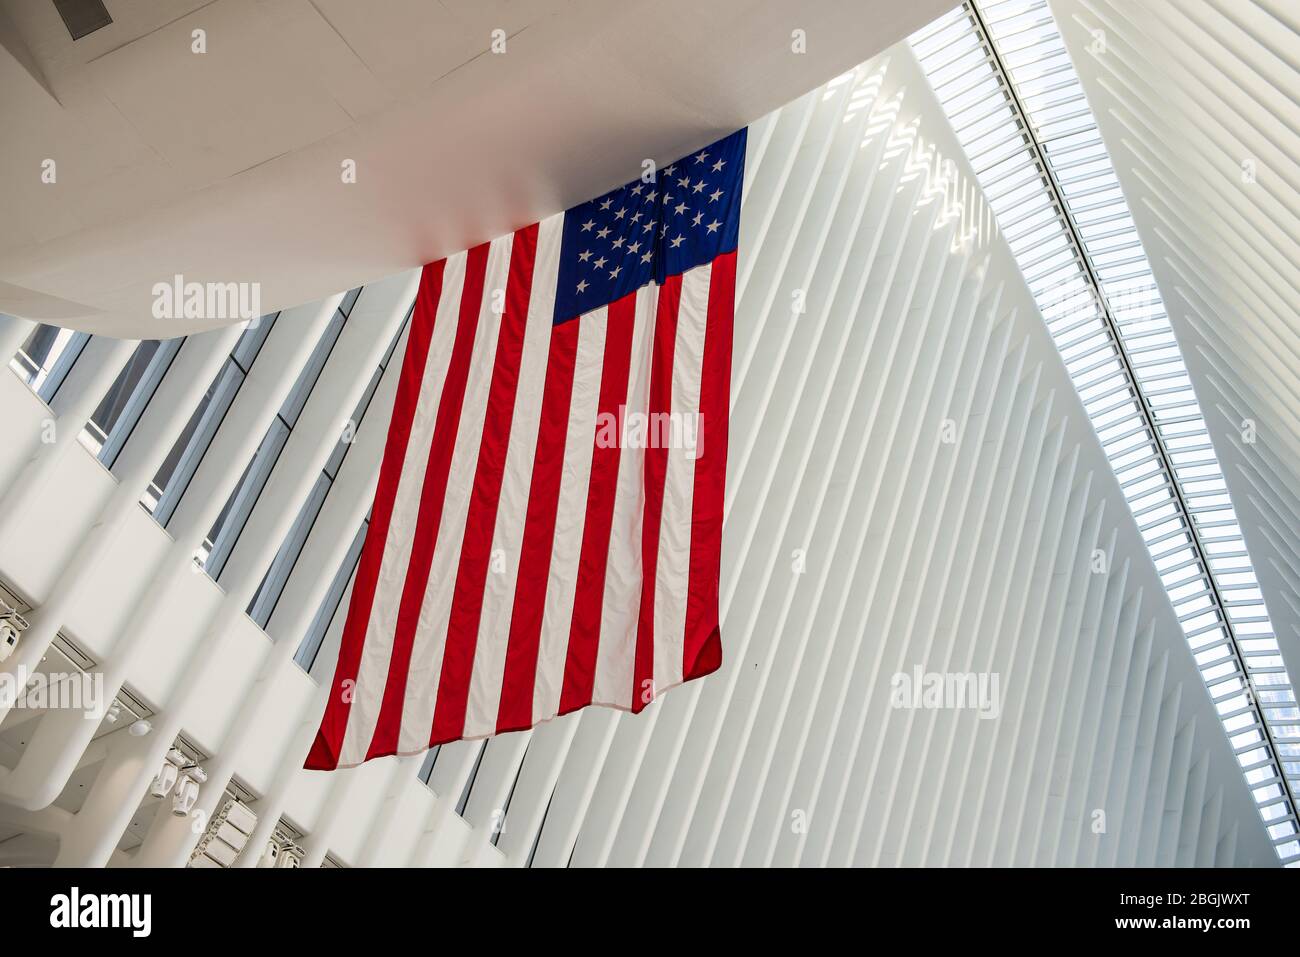 Abstract of Oculus interior at Freedom Tower in New York City with American flag in the foreground and white vertical lines. Stock Photo